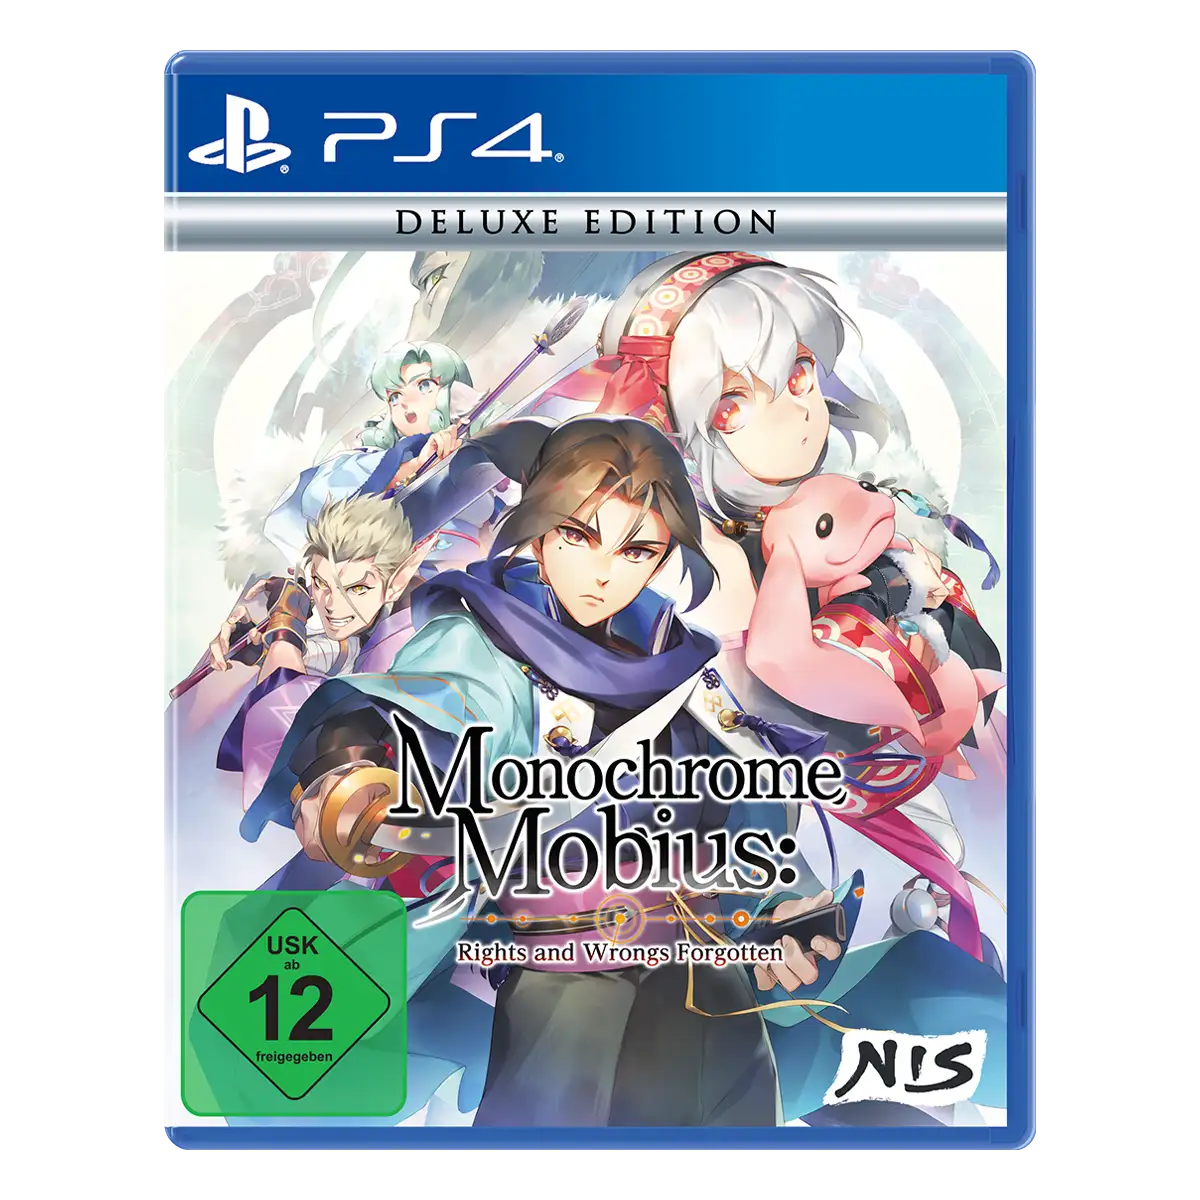 Monochrome Mobius: Rights and Wrongs Forgotten - Deluxe Edition (PS4)